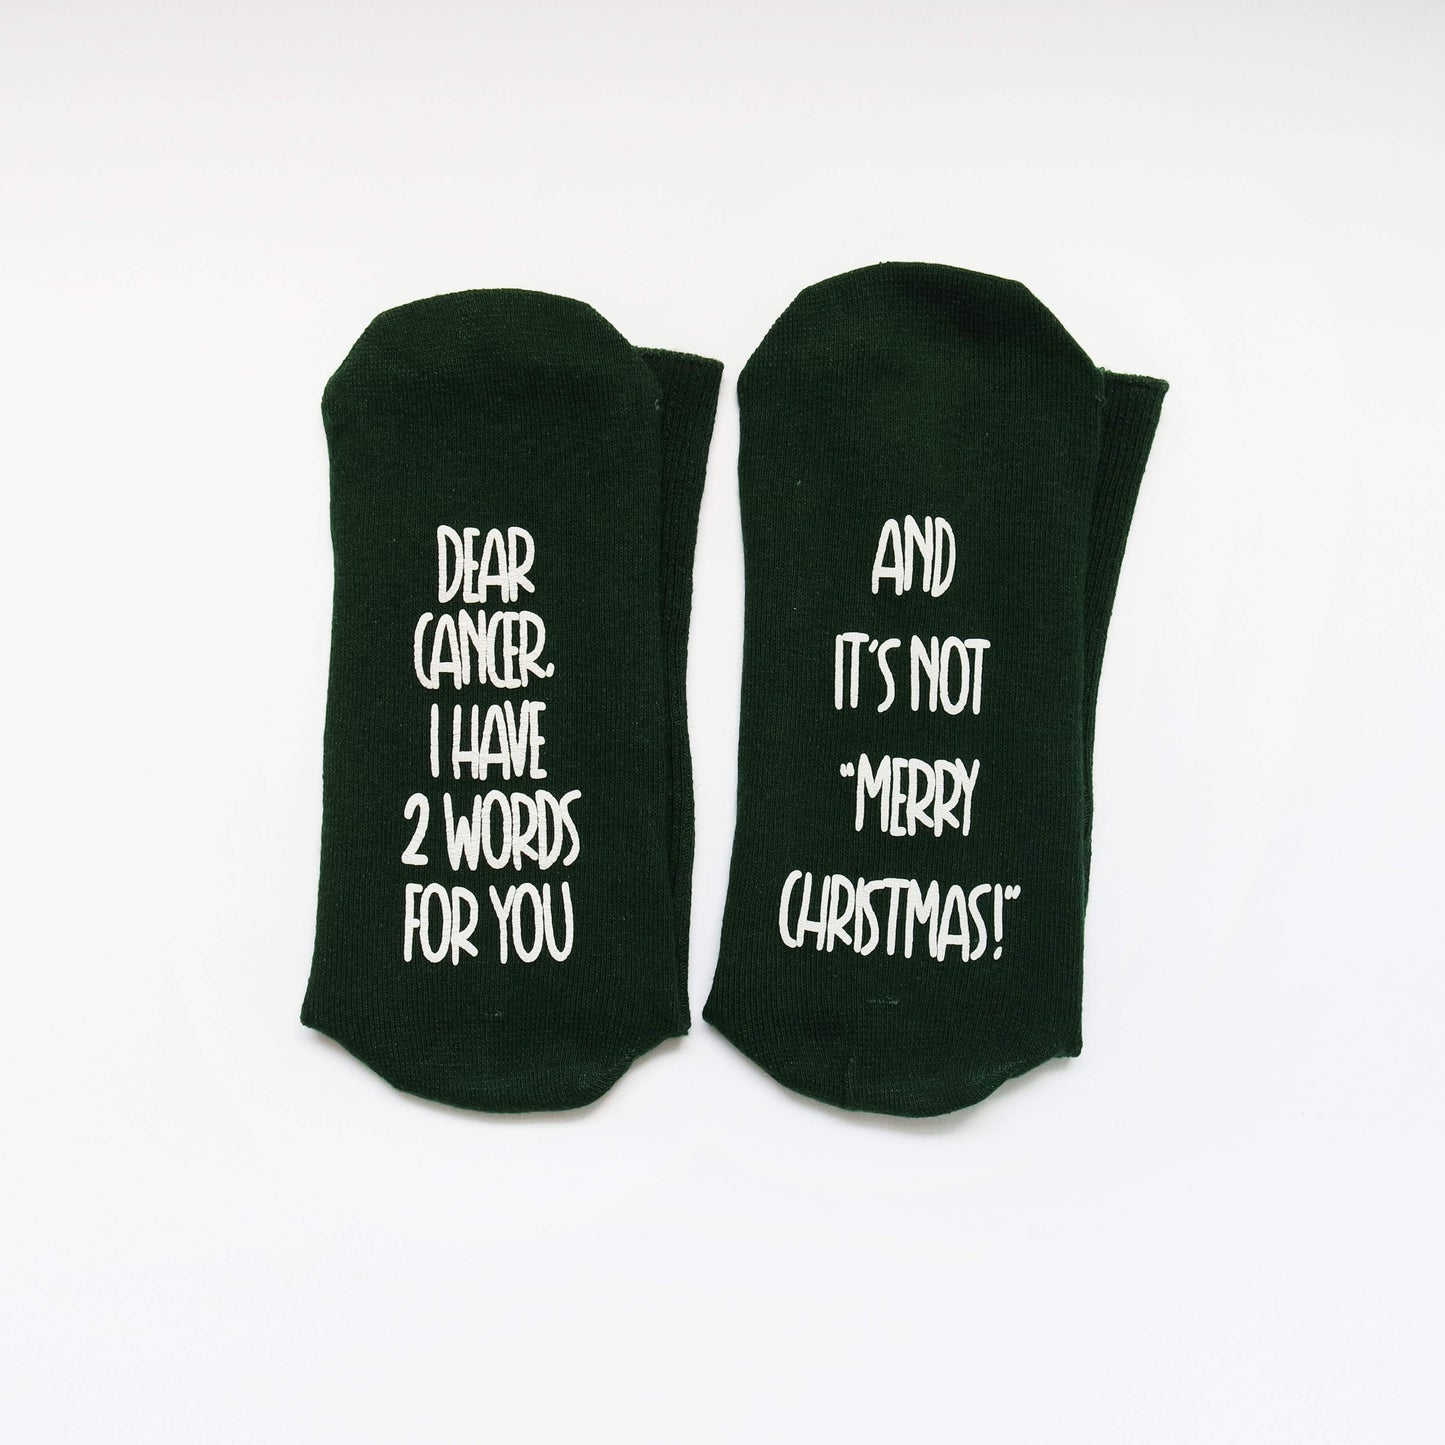 socks with a defiant message for cancer, expressing strength and resilience in the face of adversity.